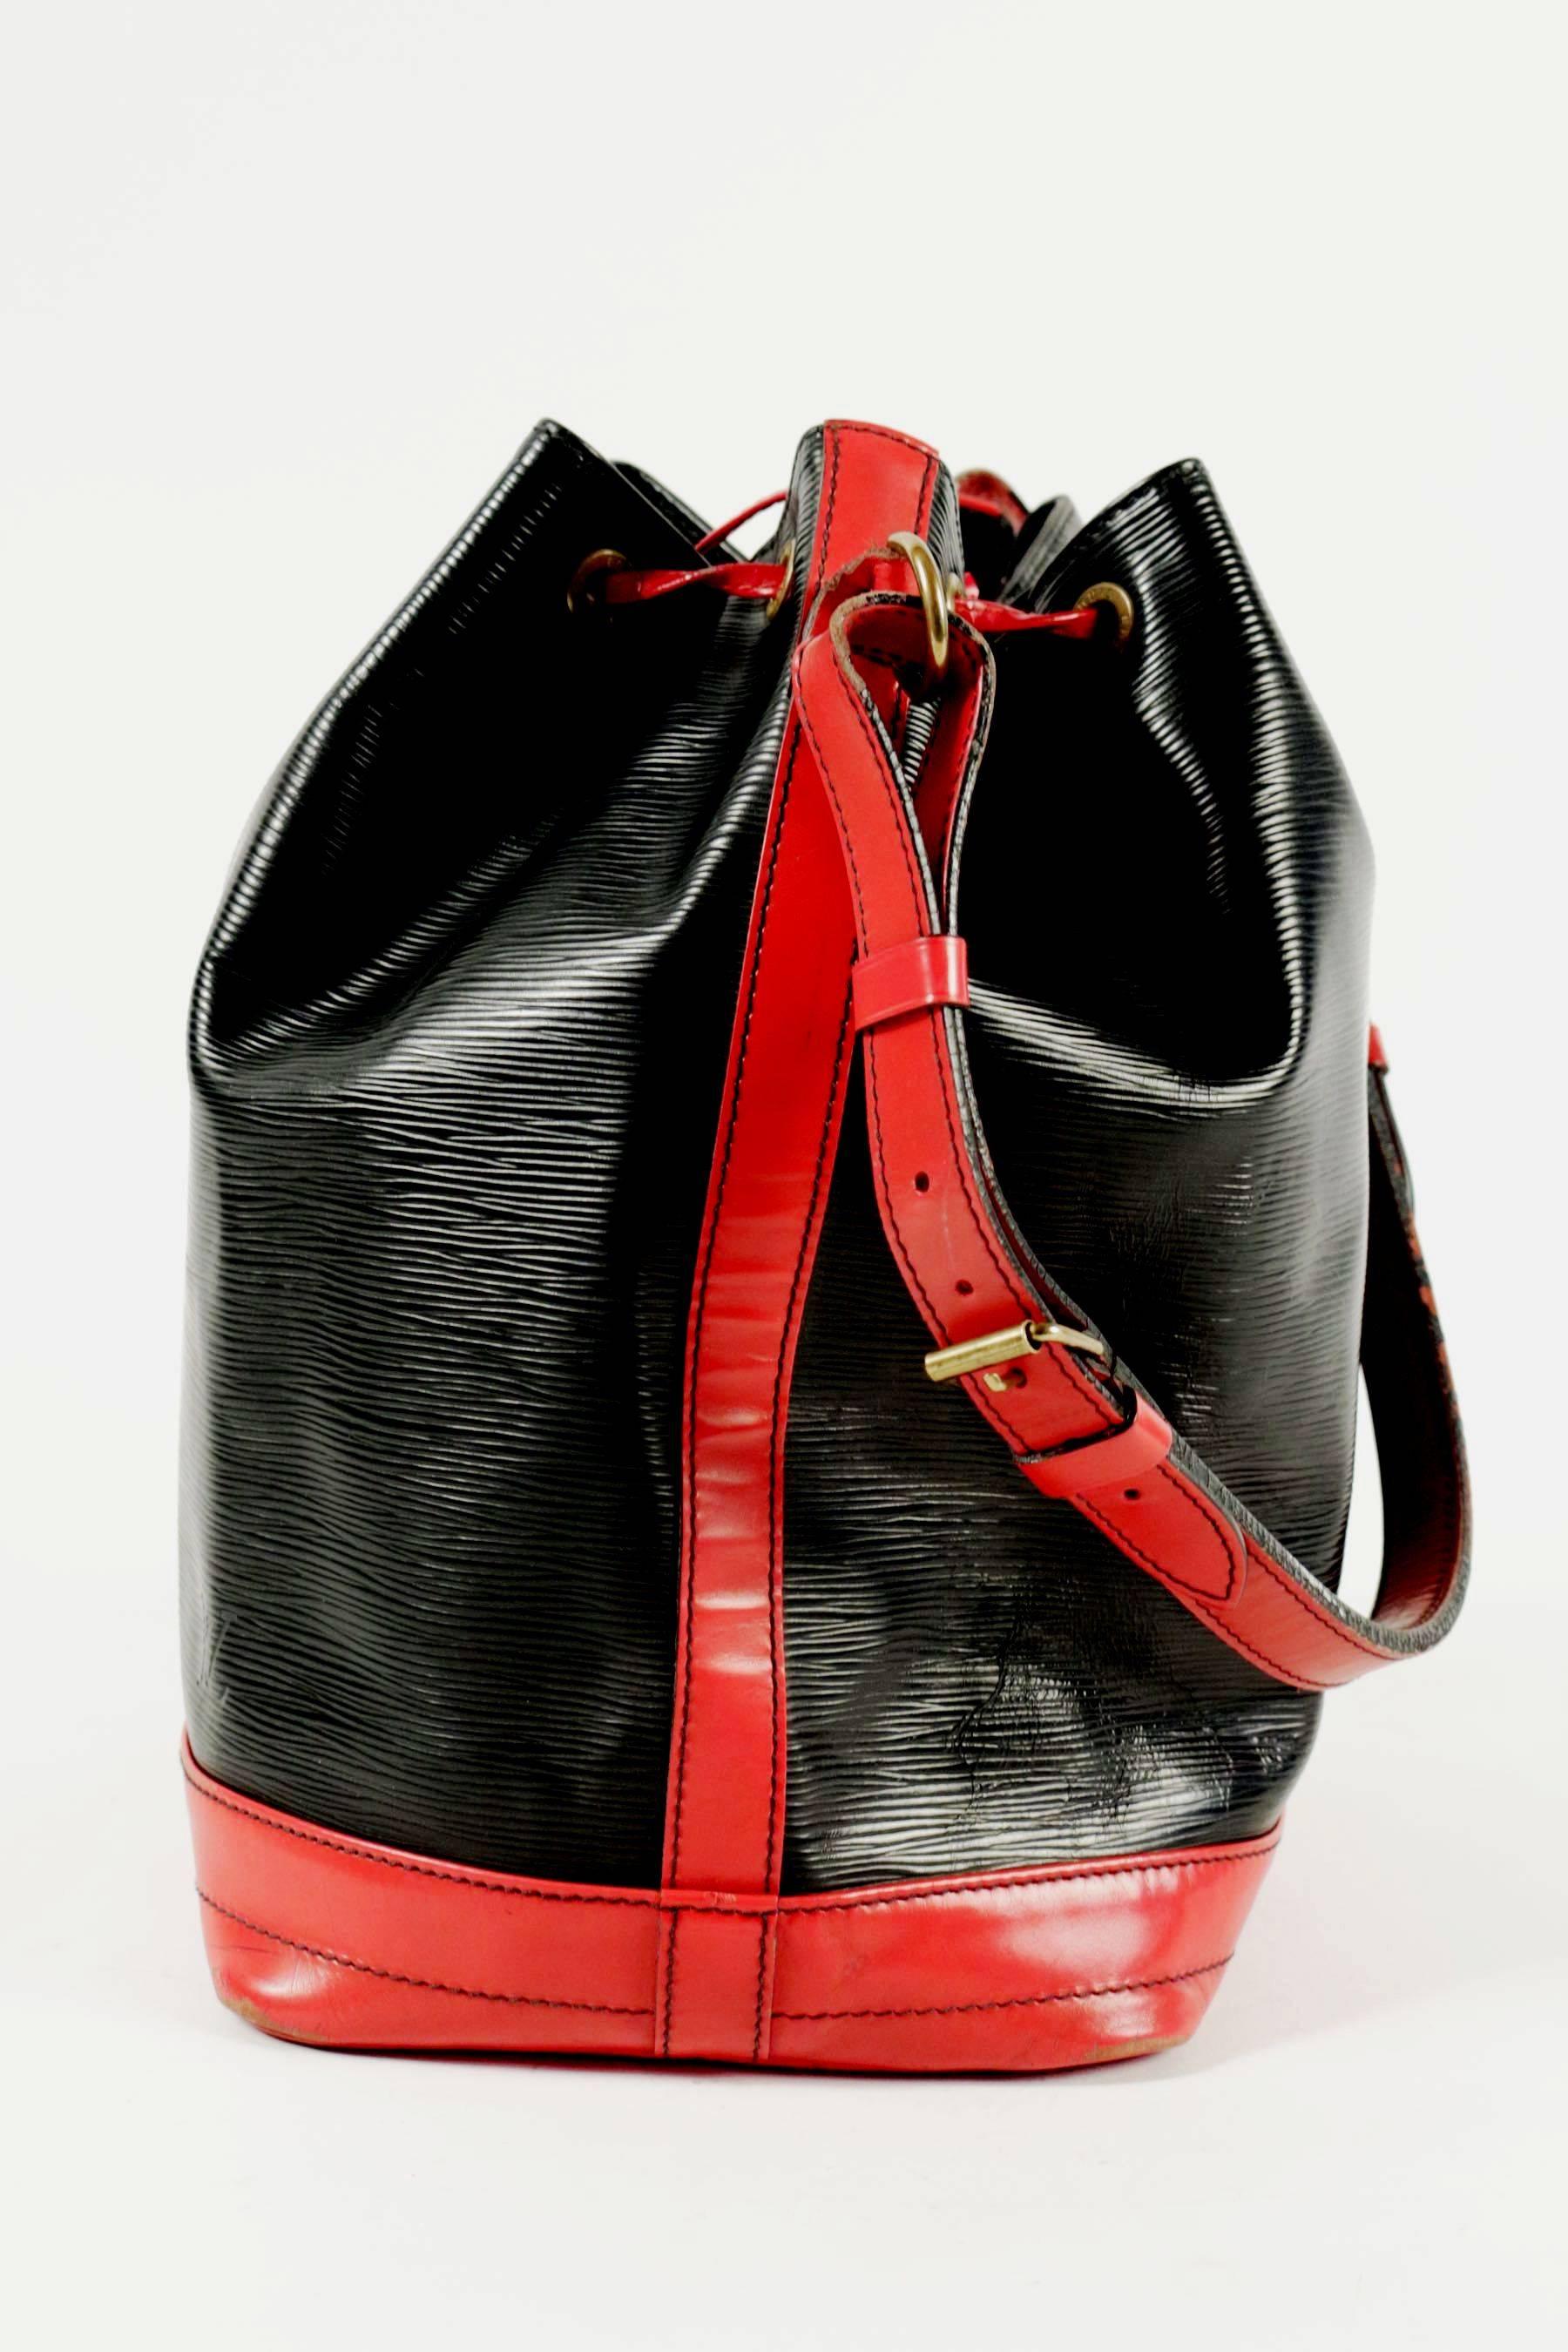 Contemporary Vintage Louis Vuitton Grand Noe Bag, Epi Leather, Black and Red